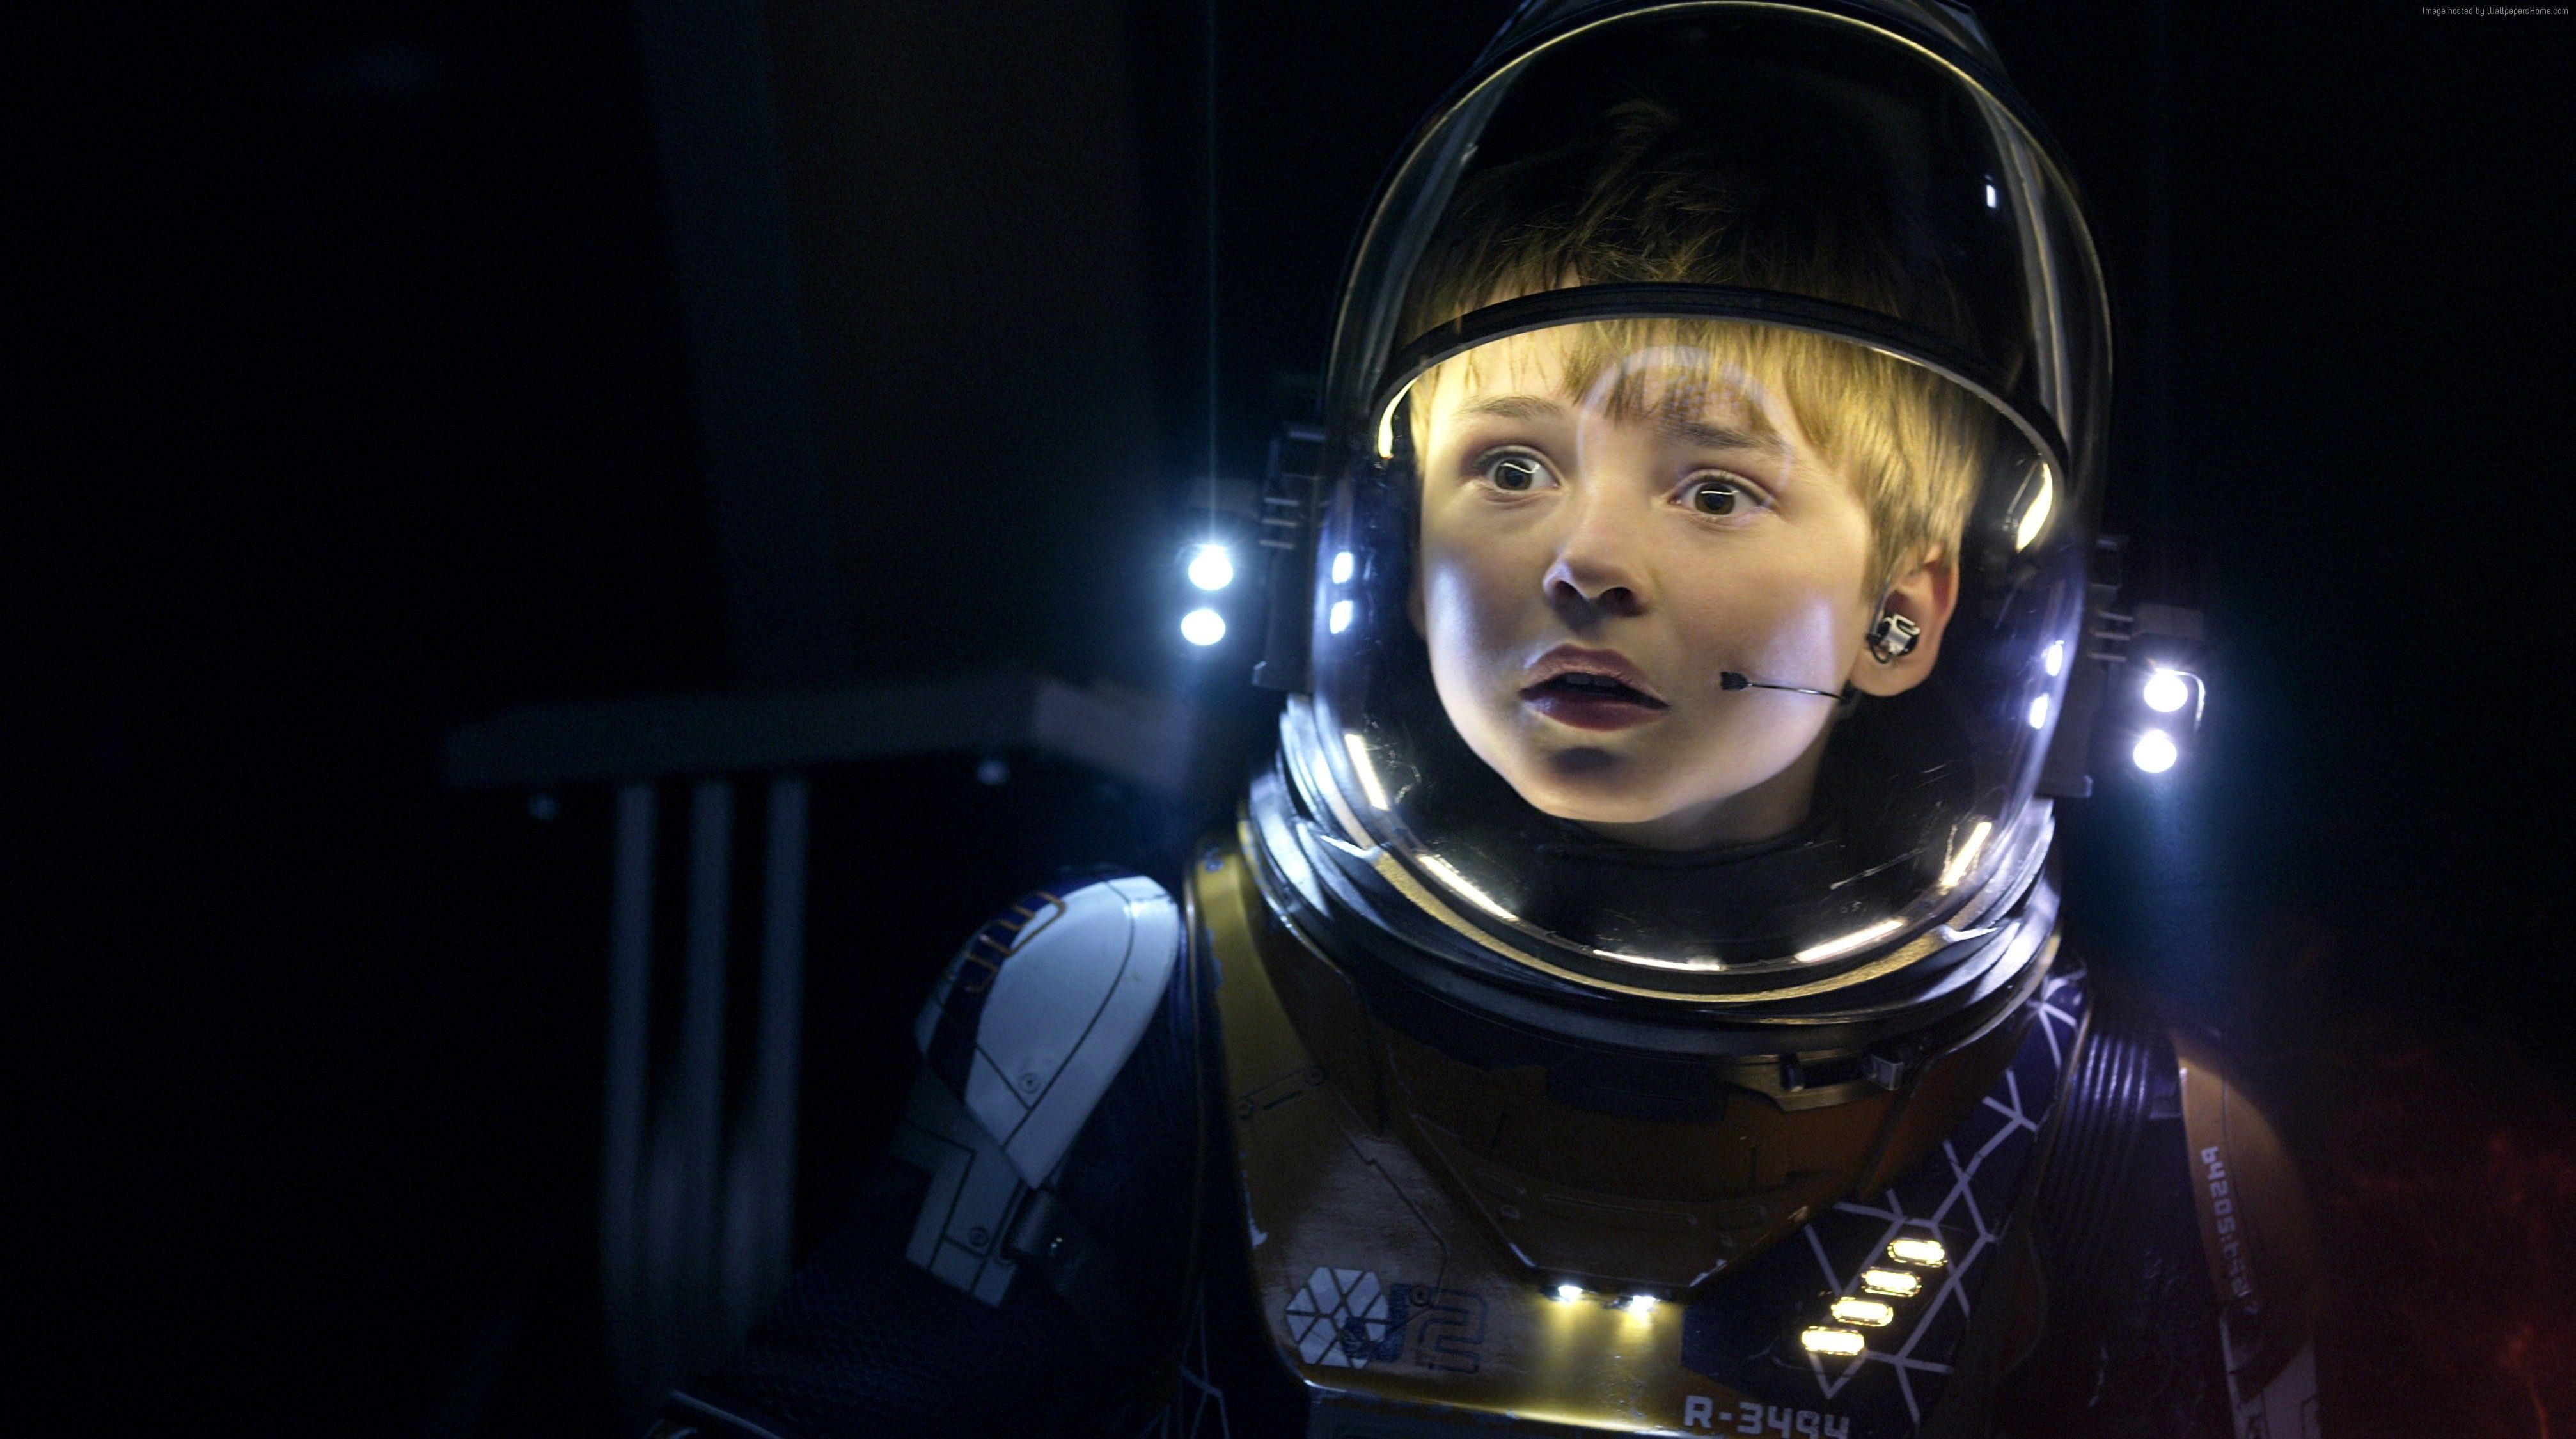 Max Jenkins In Lost In Space, HD Tv Shows, 4k Wallpaper, Image